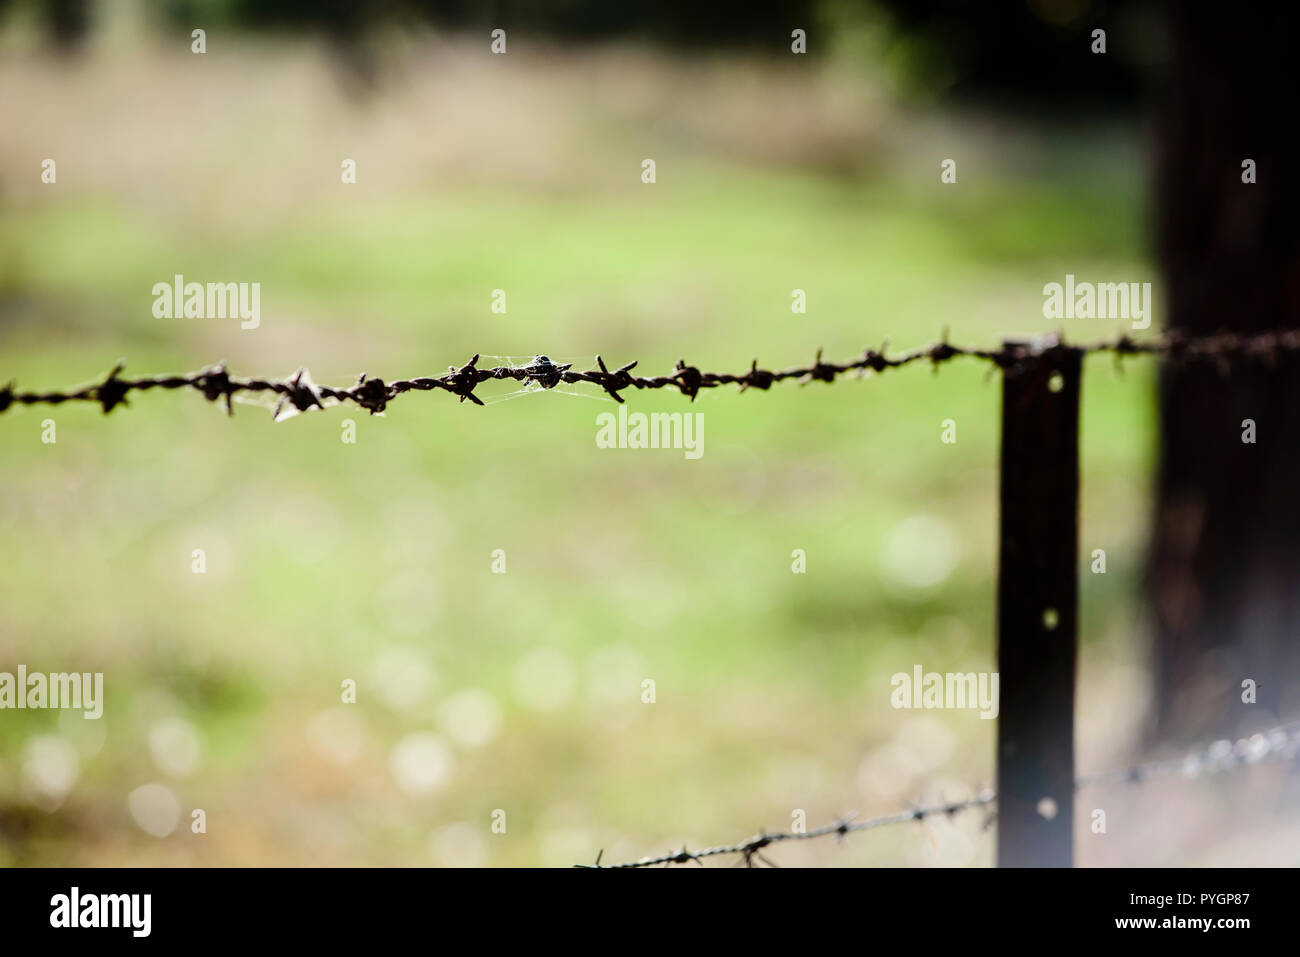 Barbed wire fence with star picket, close up view Australia Stock Photo